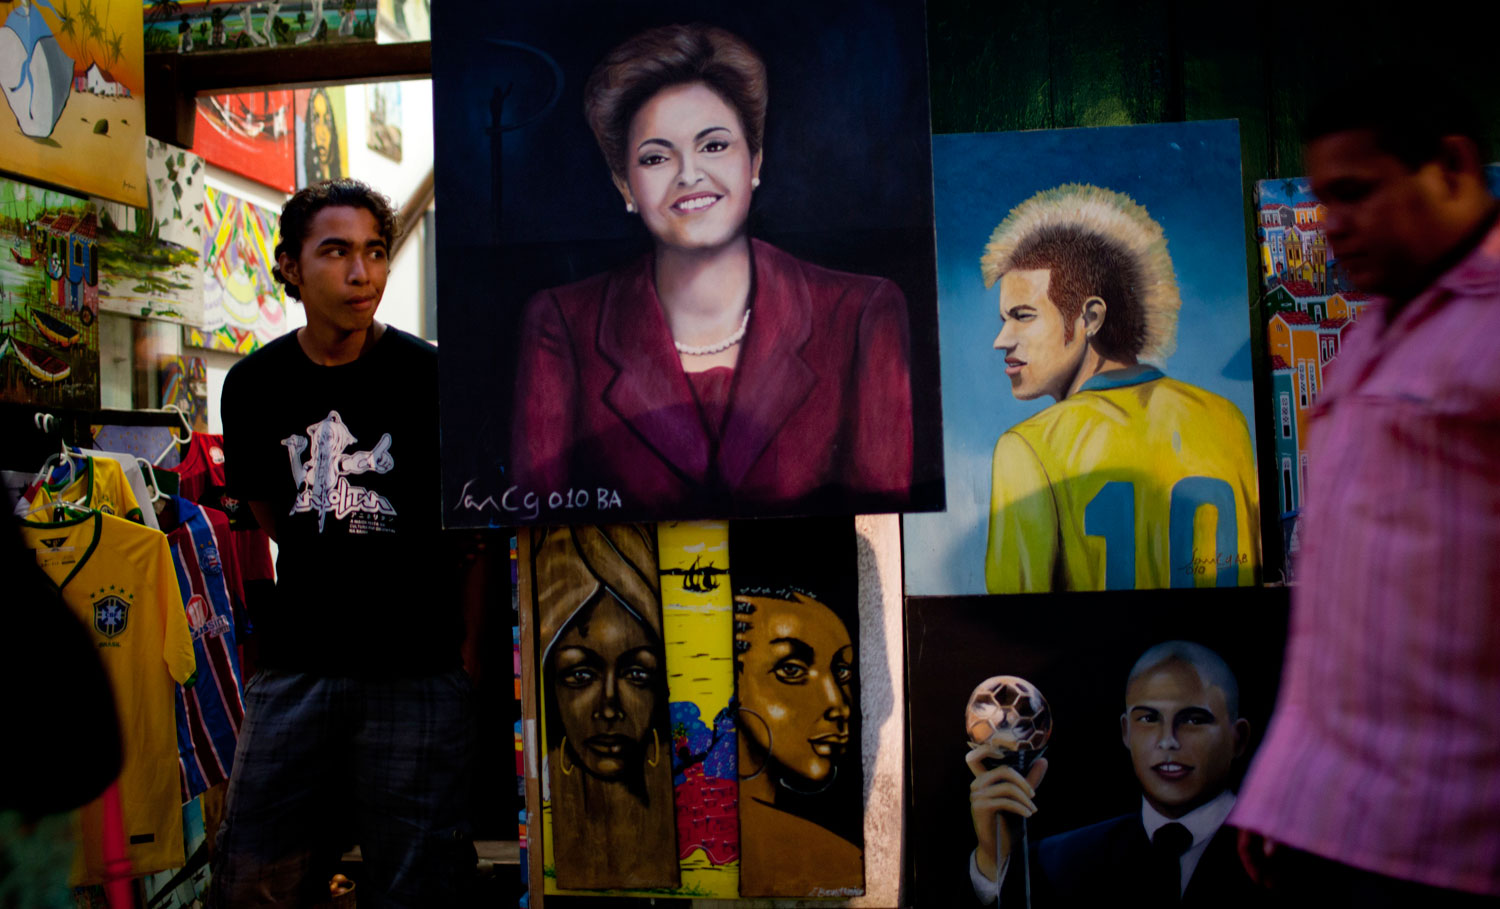 A man stands outside a shop selling paintings of Brazil's President Dilma Rousseff and Brazil's soccer player Neymar along a street decorated for the World Cup in the Pelourinho neighborhood of Salvador, Brazil on June 15, 2014.